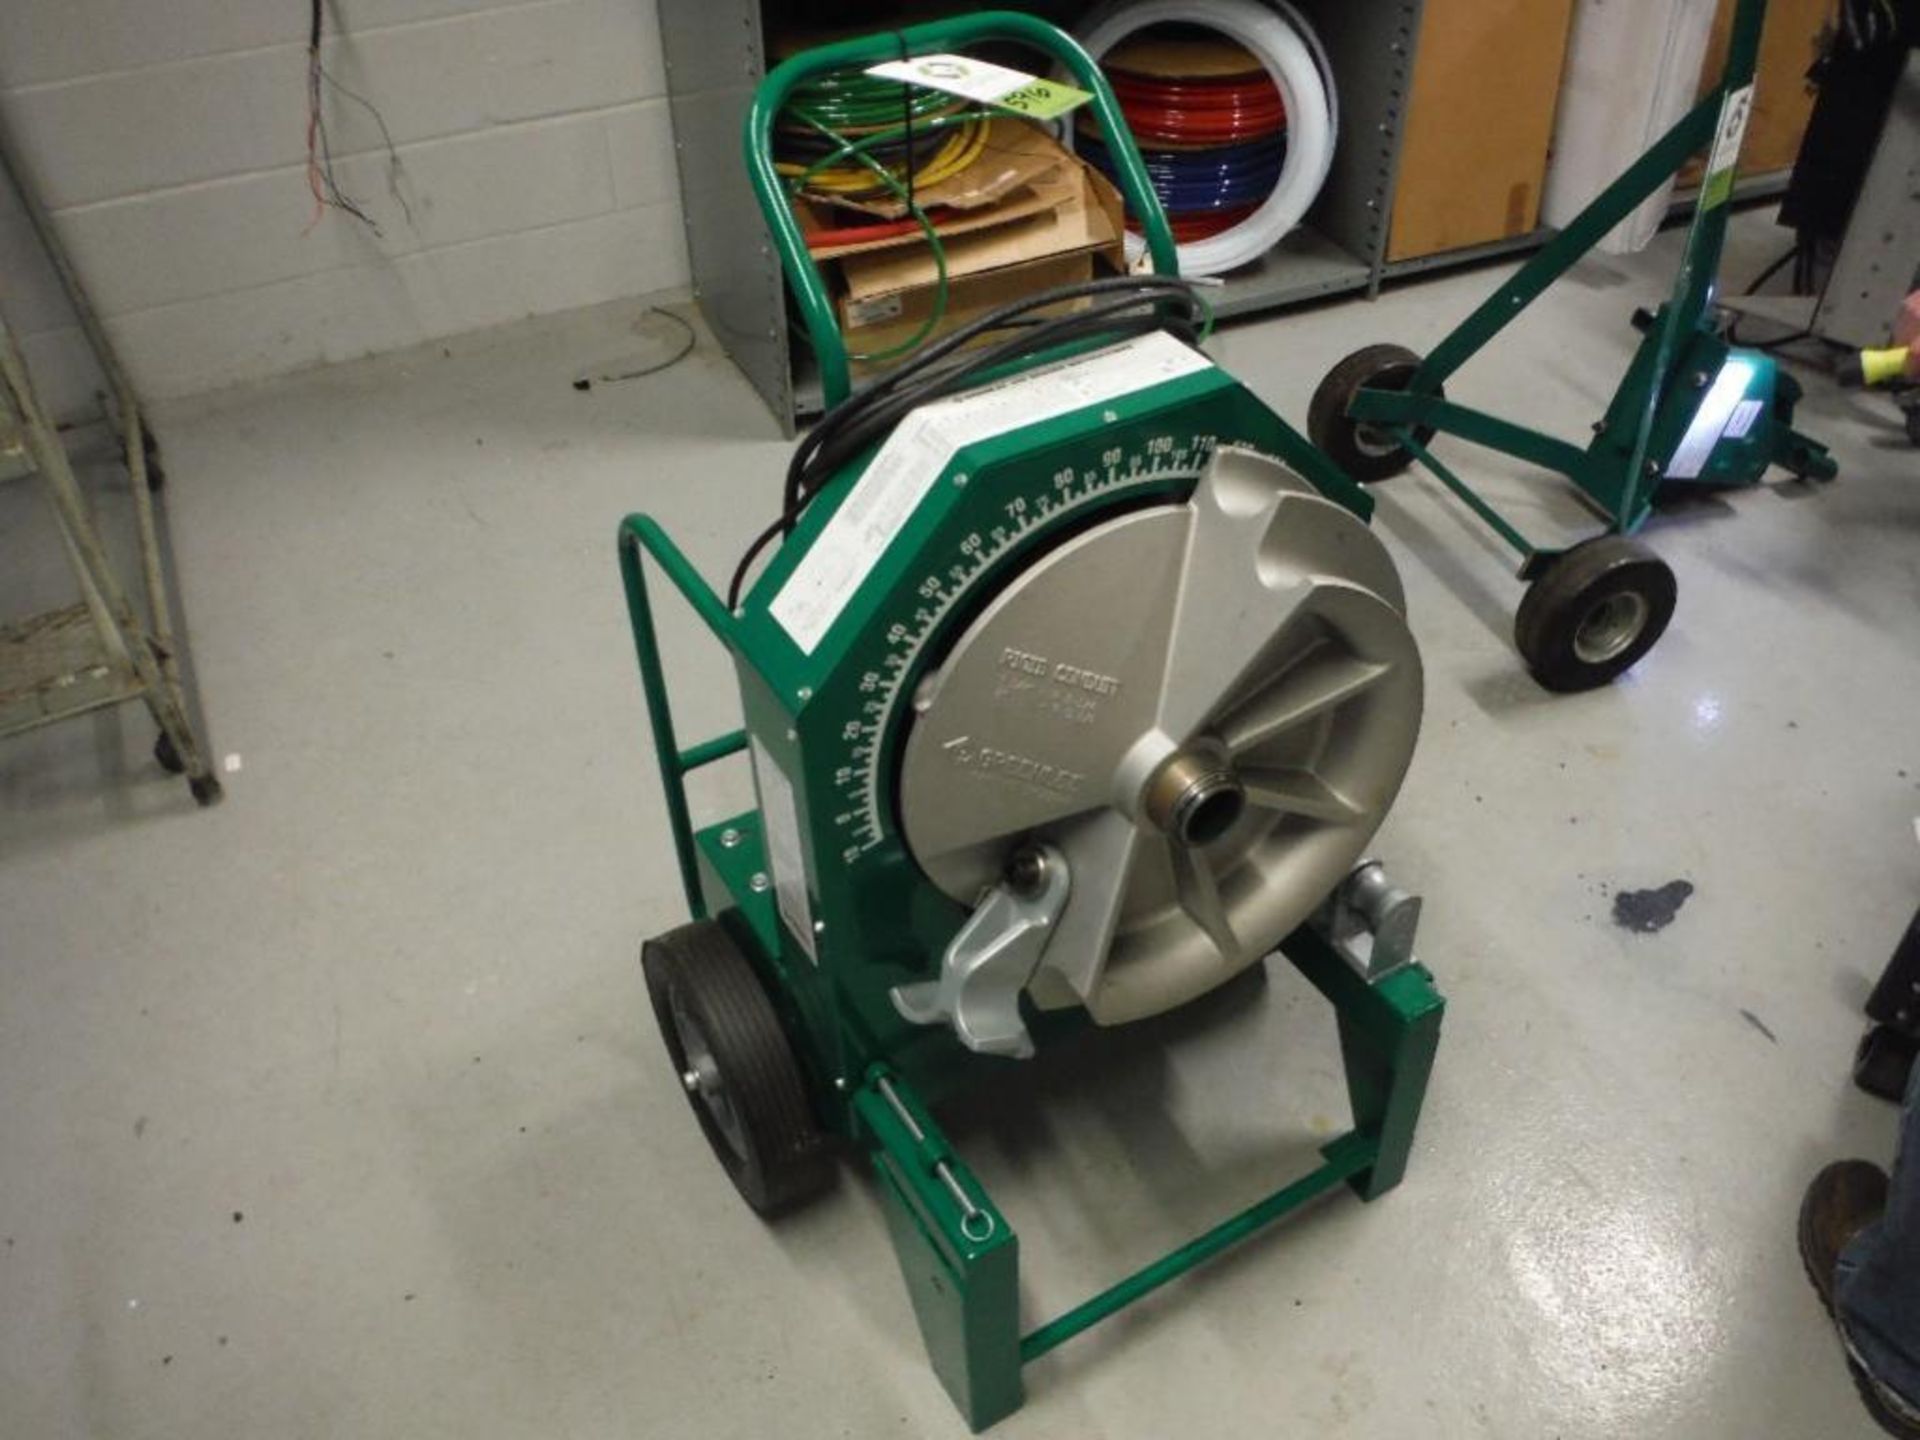 Greenlee 555C electric pipe bender for 1/2 in. to 2 in. conduit, SN AFB5513GQ with 1/2 to 2 in. rigi